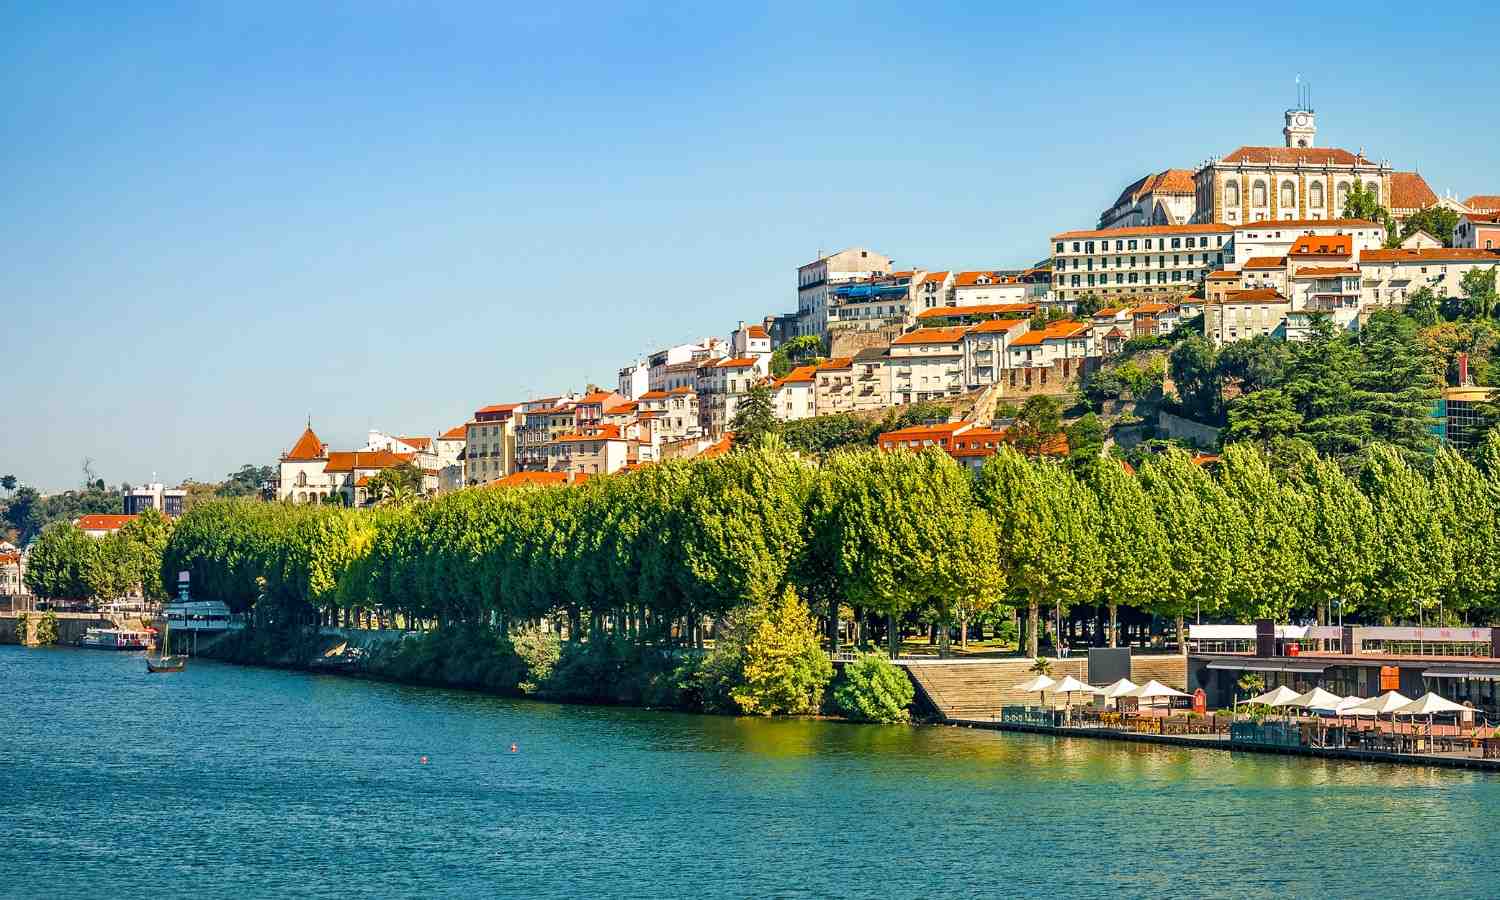 Coimbra awaits on Day 5 of our 7 Ways to Spend 7 Days in Portugal itinerary.